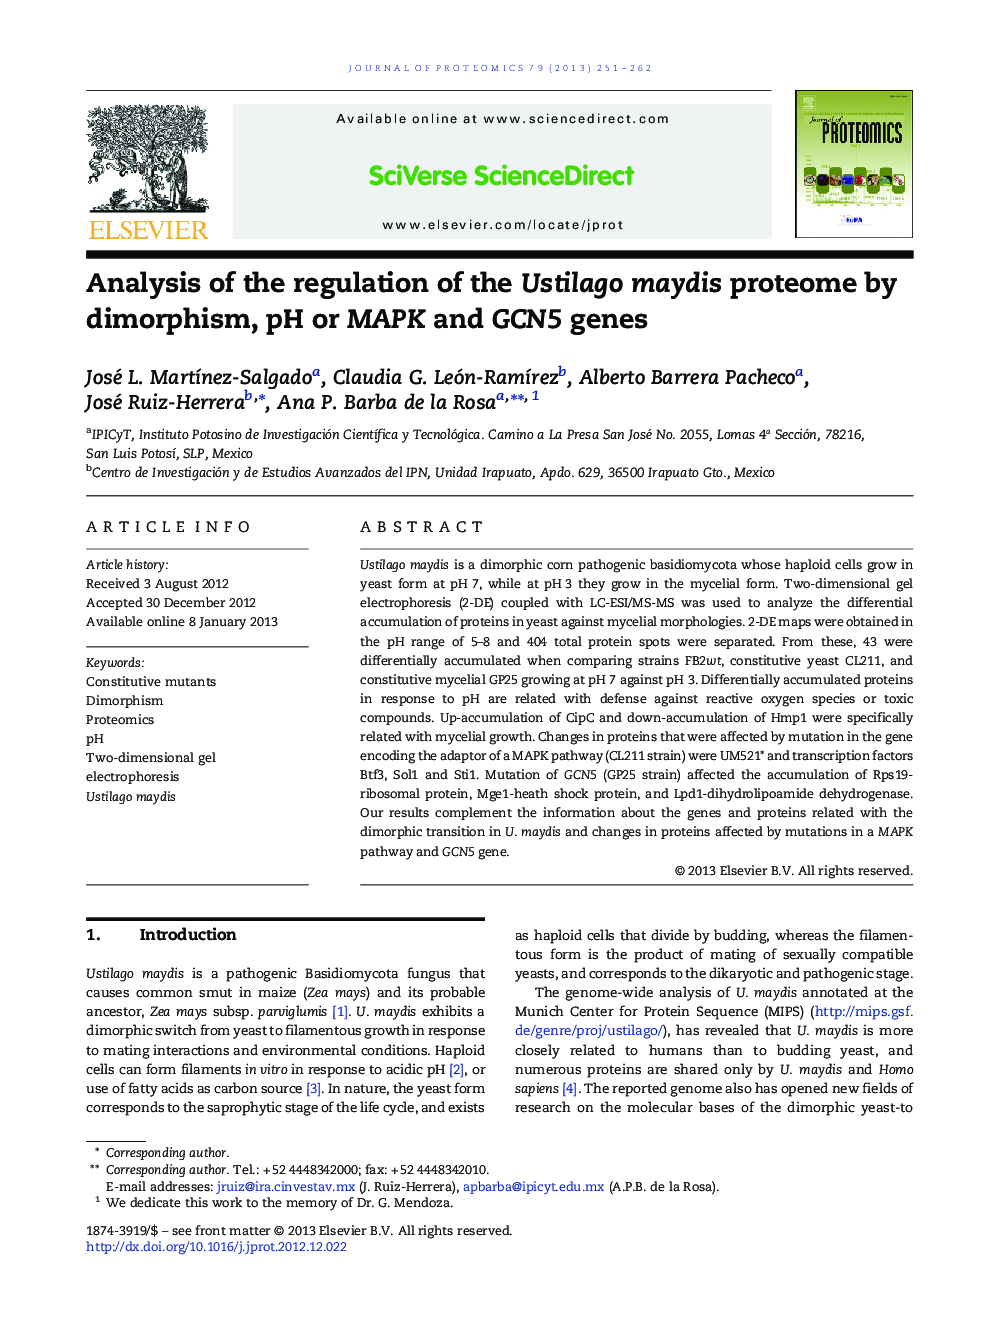 Analysis of the regulation of the Ustilago maydis proteome by dimorphism, pH or MAPK and GCN5 genes